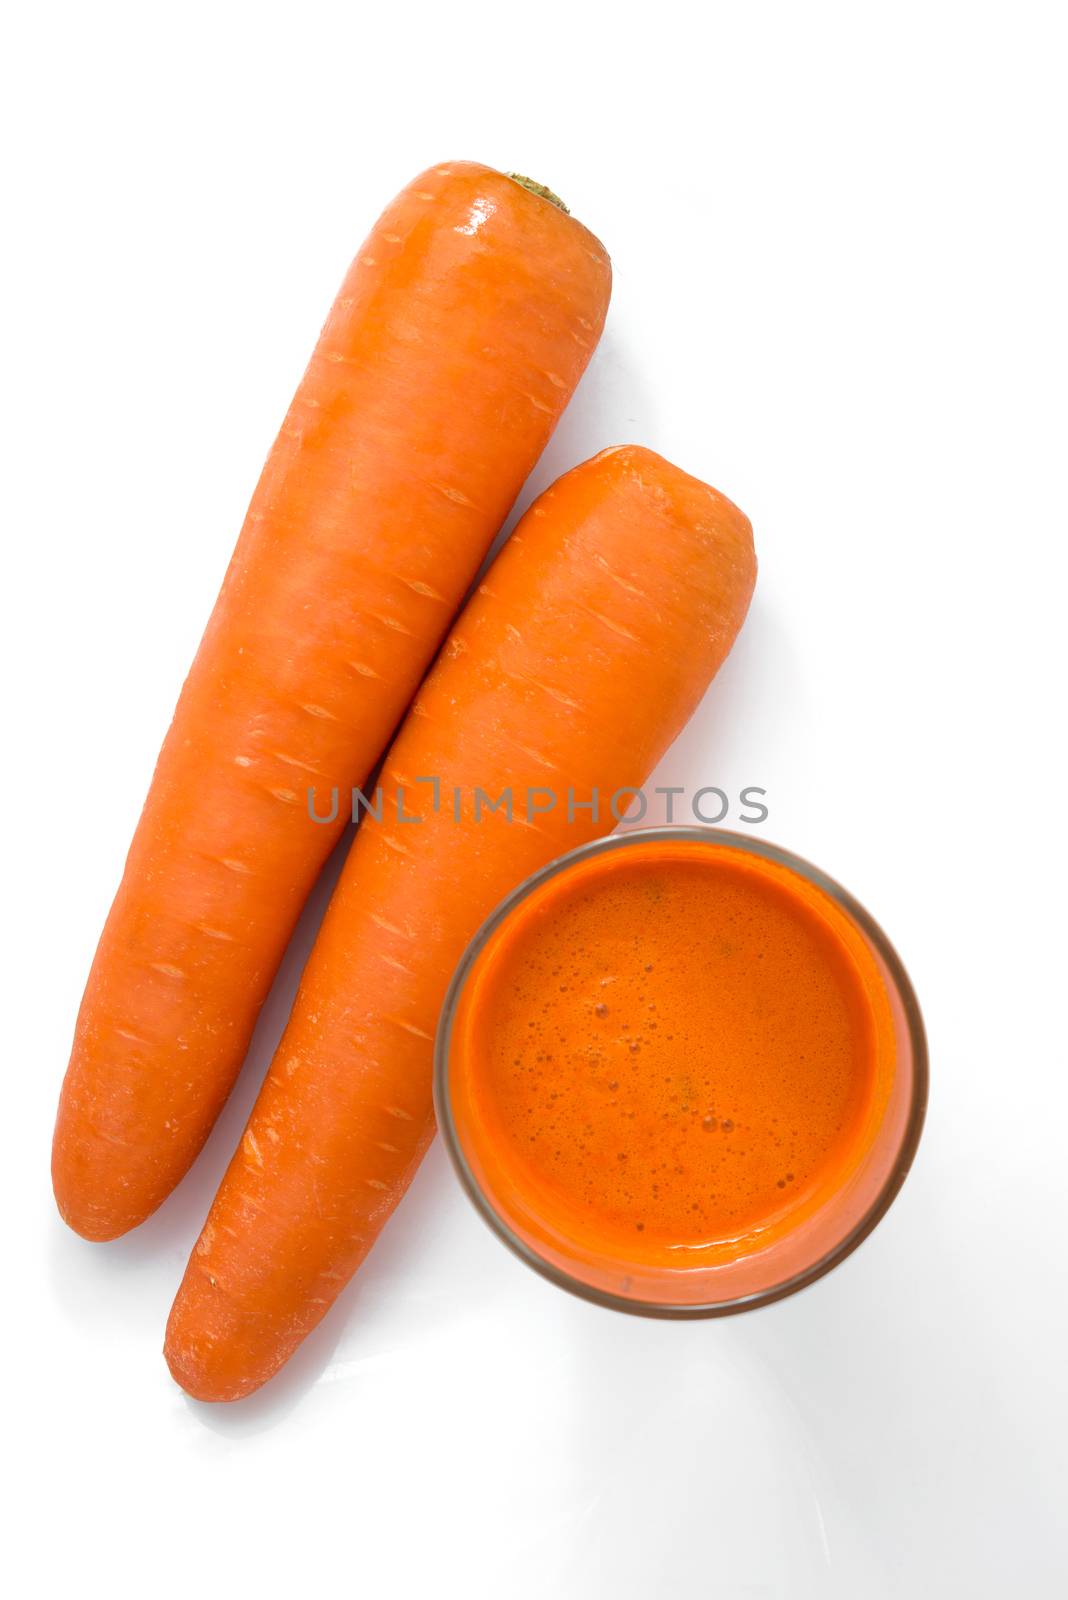 grass of carrot juice isolated on white background